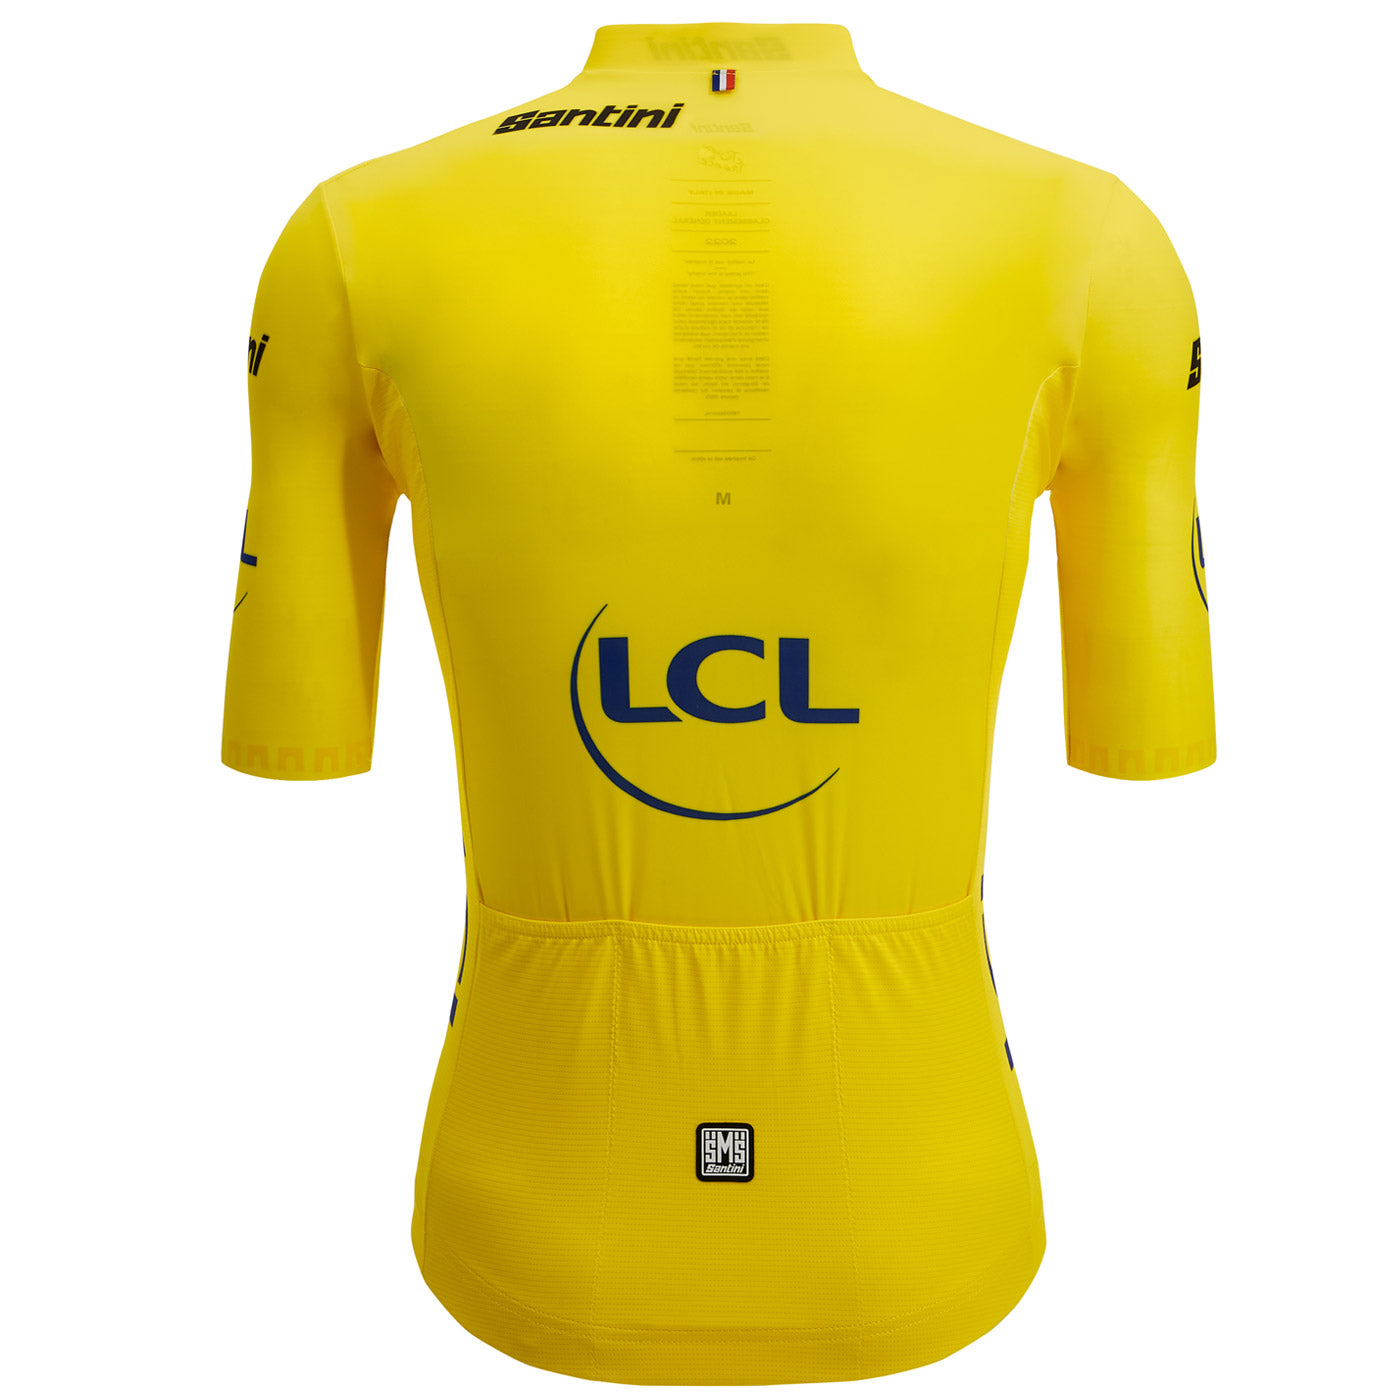 Take home the yellow jersey in Tour de France 2023 and Pro